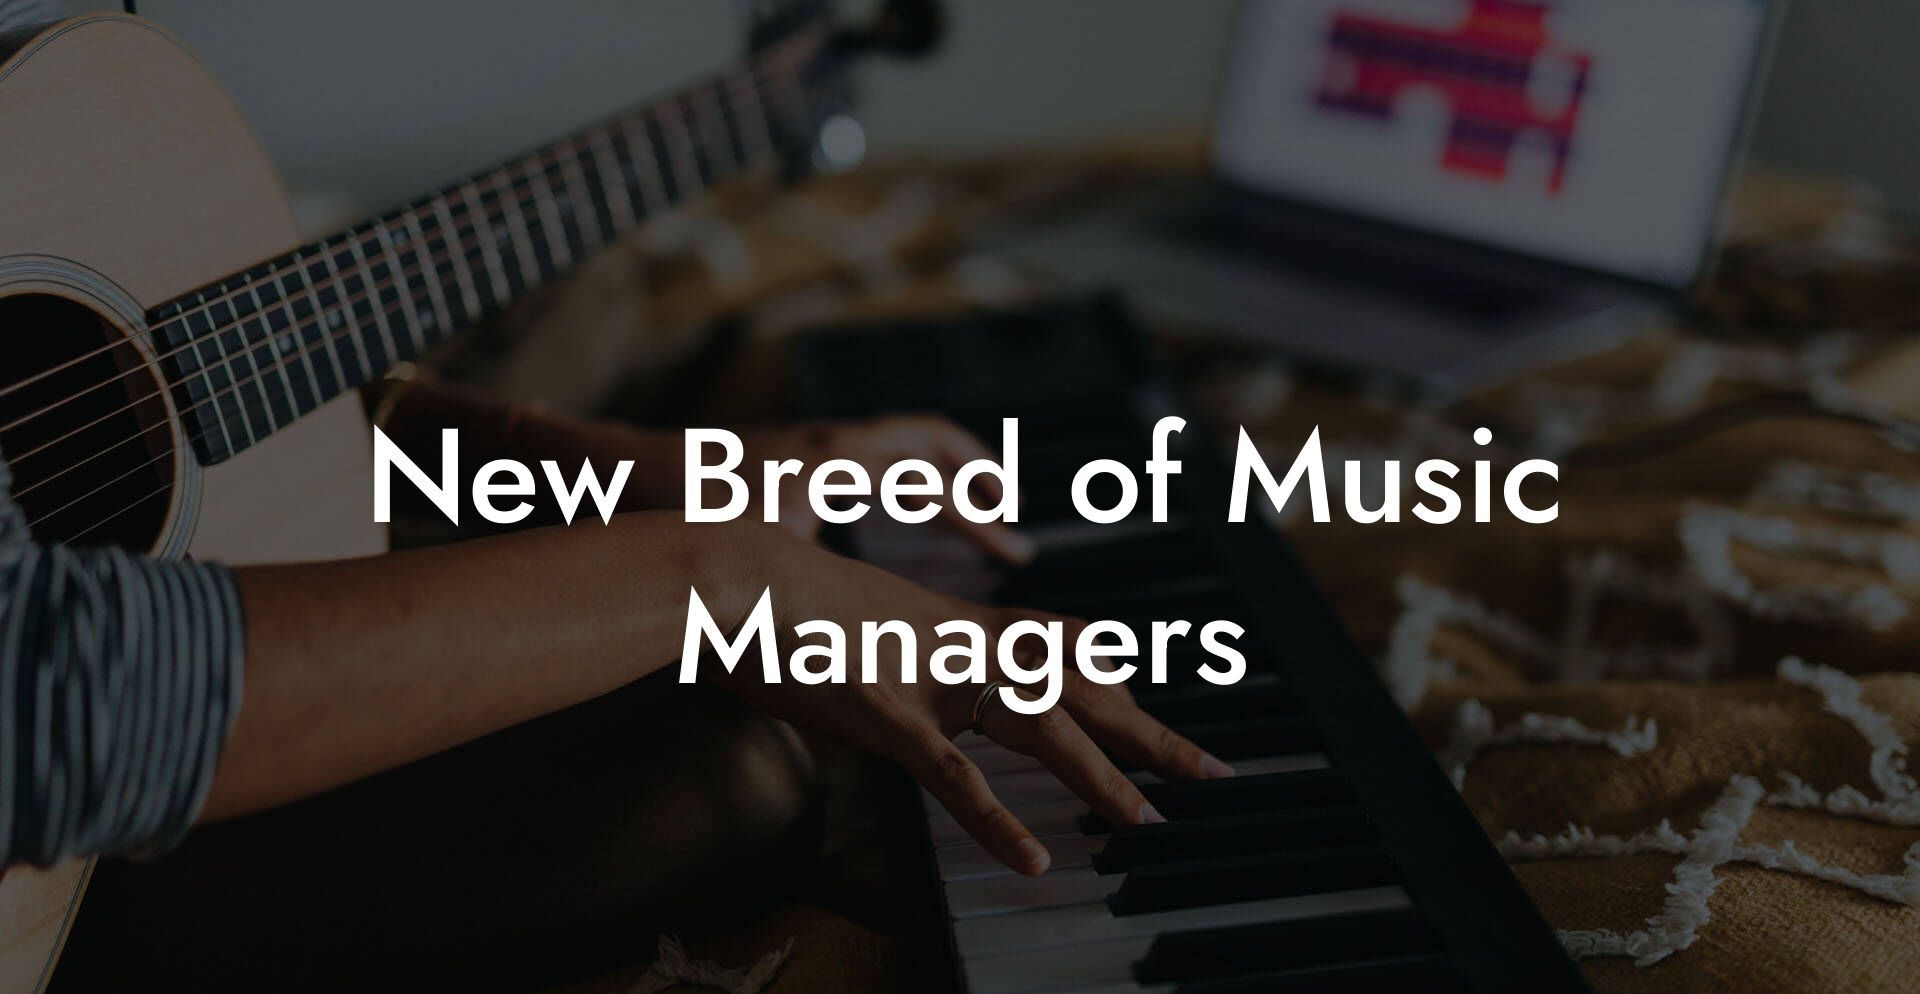 New Breed of Music Managers